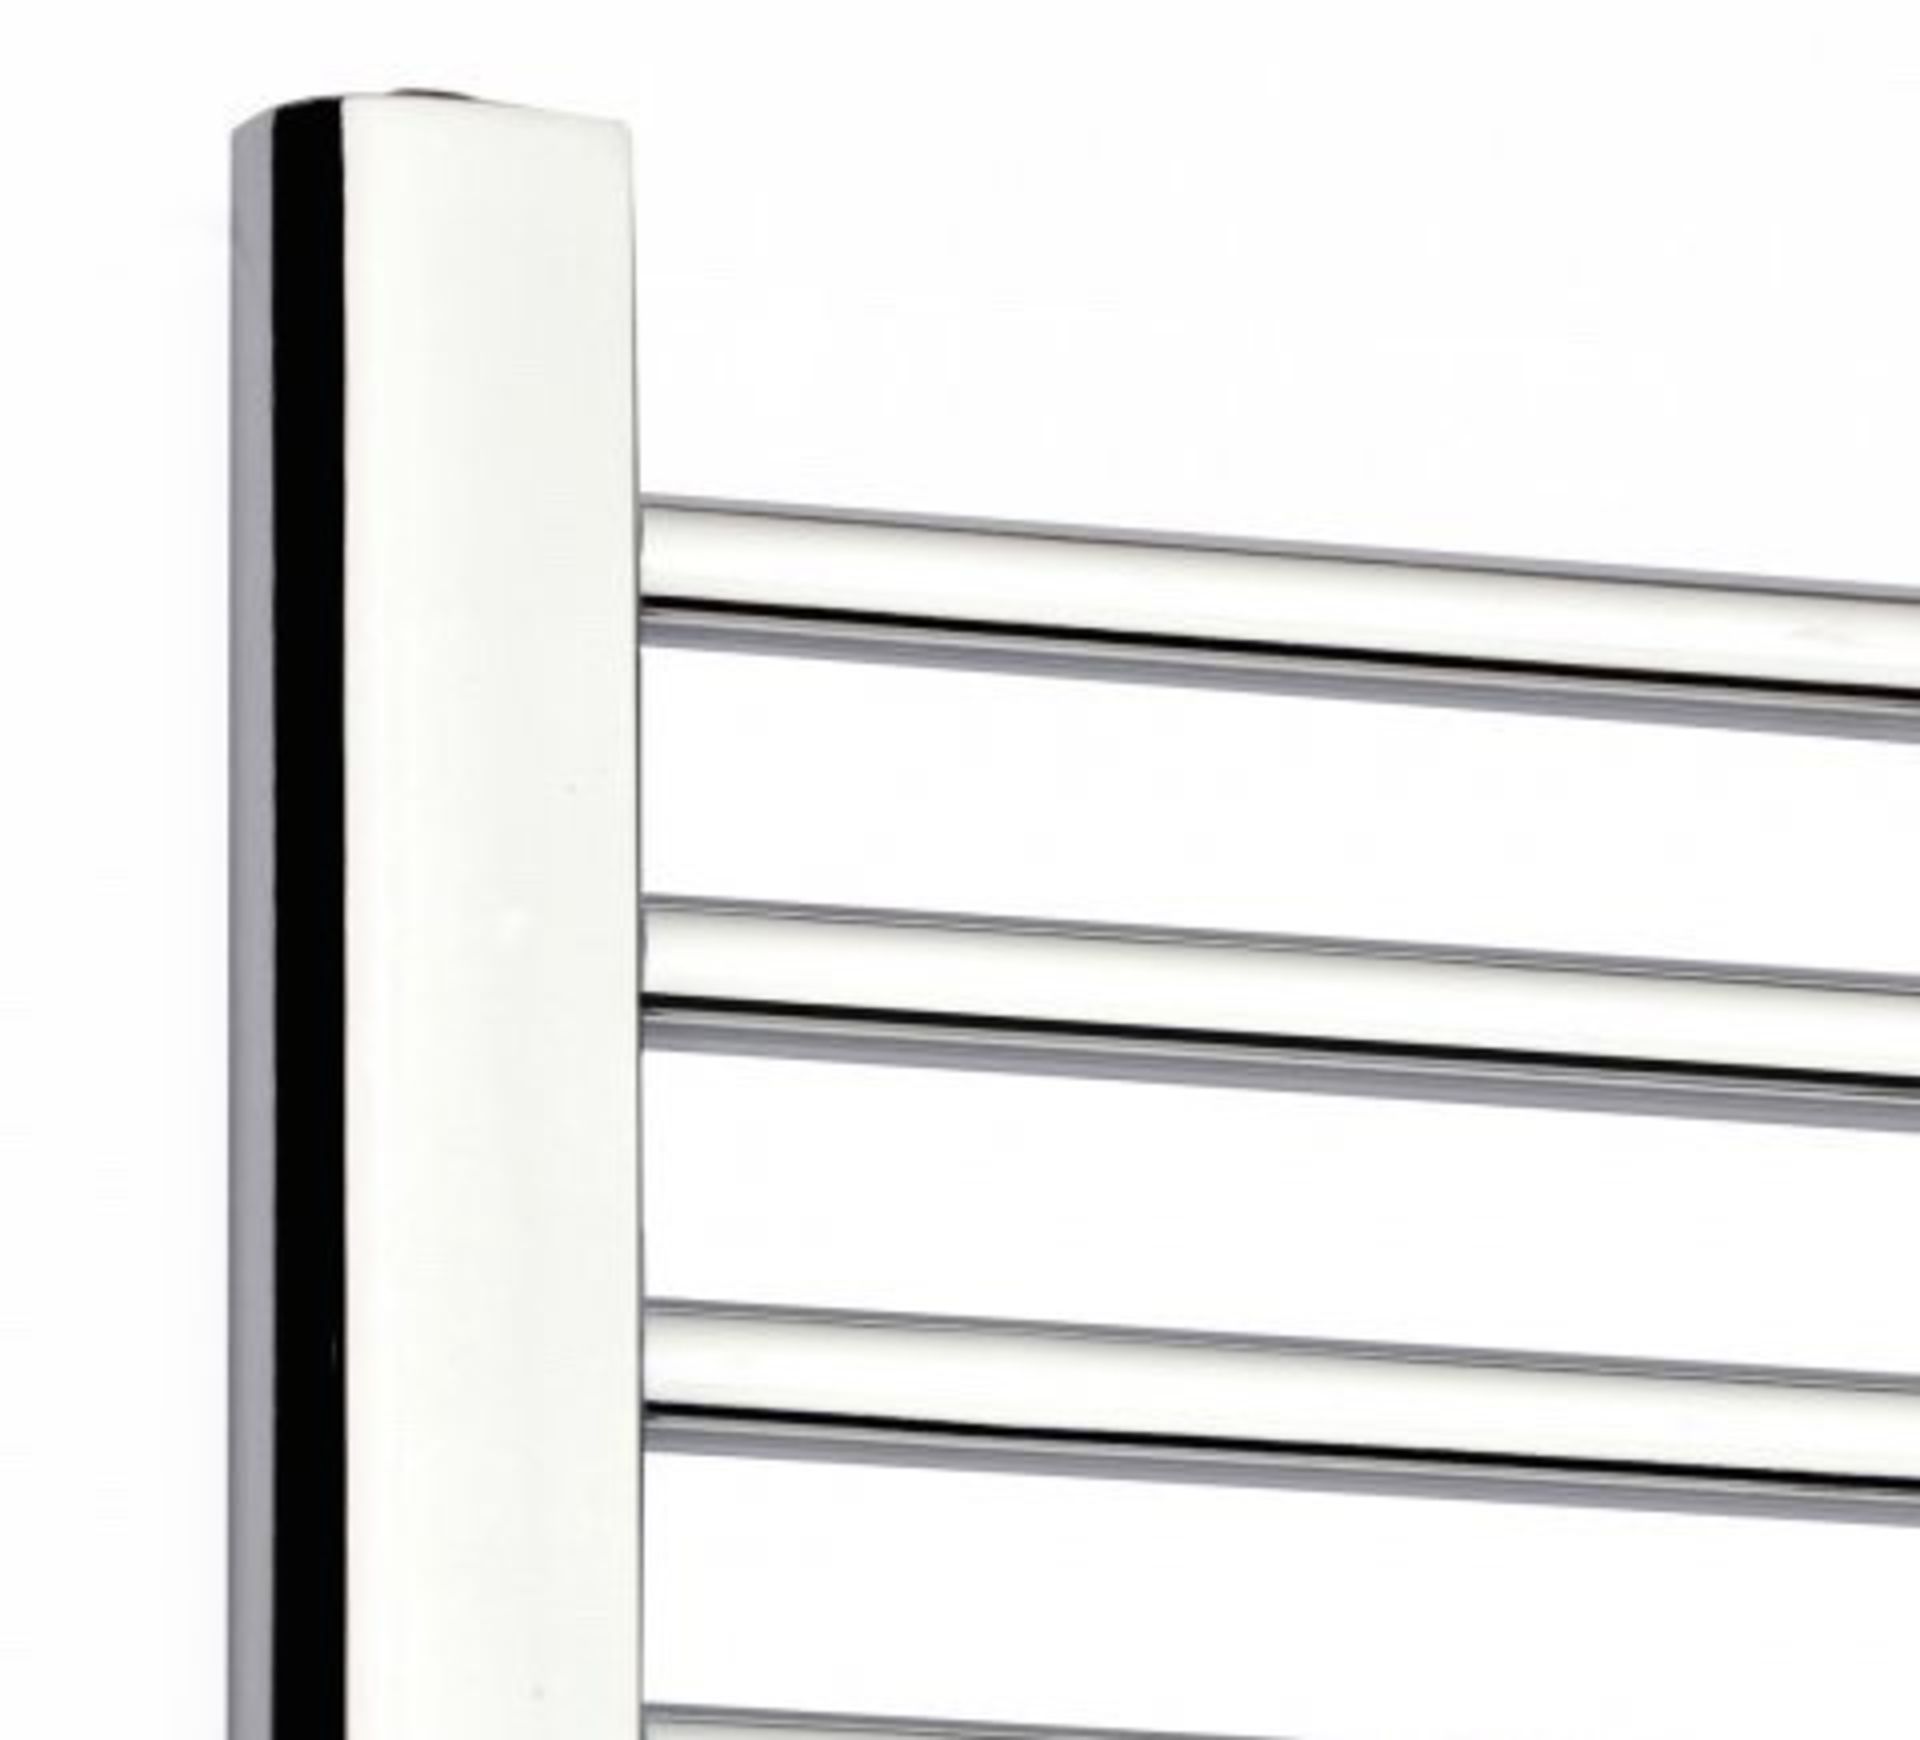 AA127- 1000x600mm White Straight Rail Ladder Towel Radiator - Polar Basic Offering durability and - Image 6 of 7